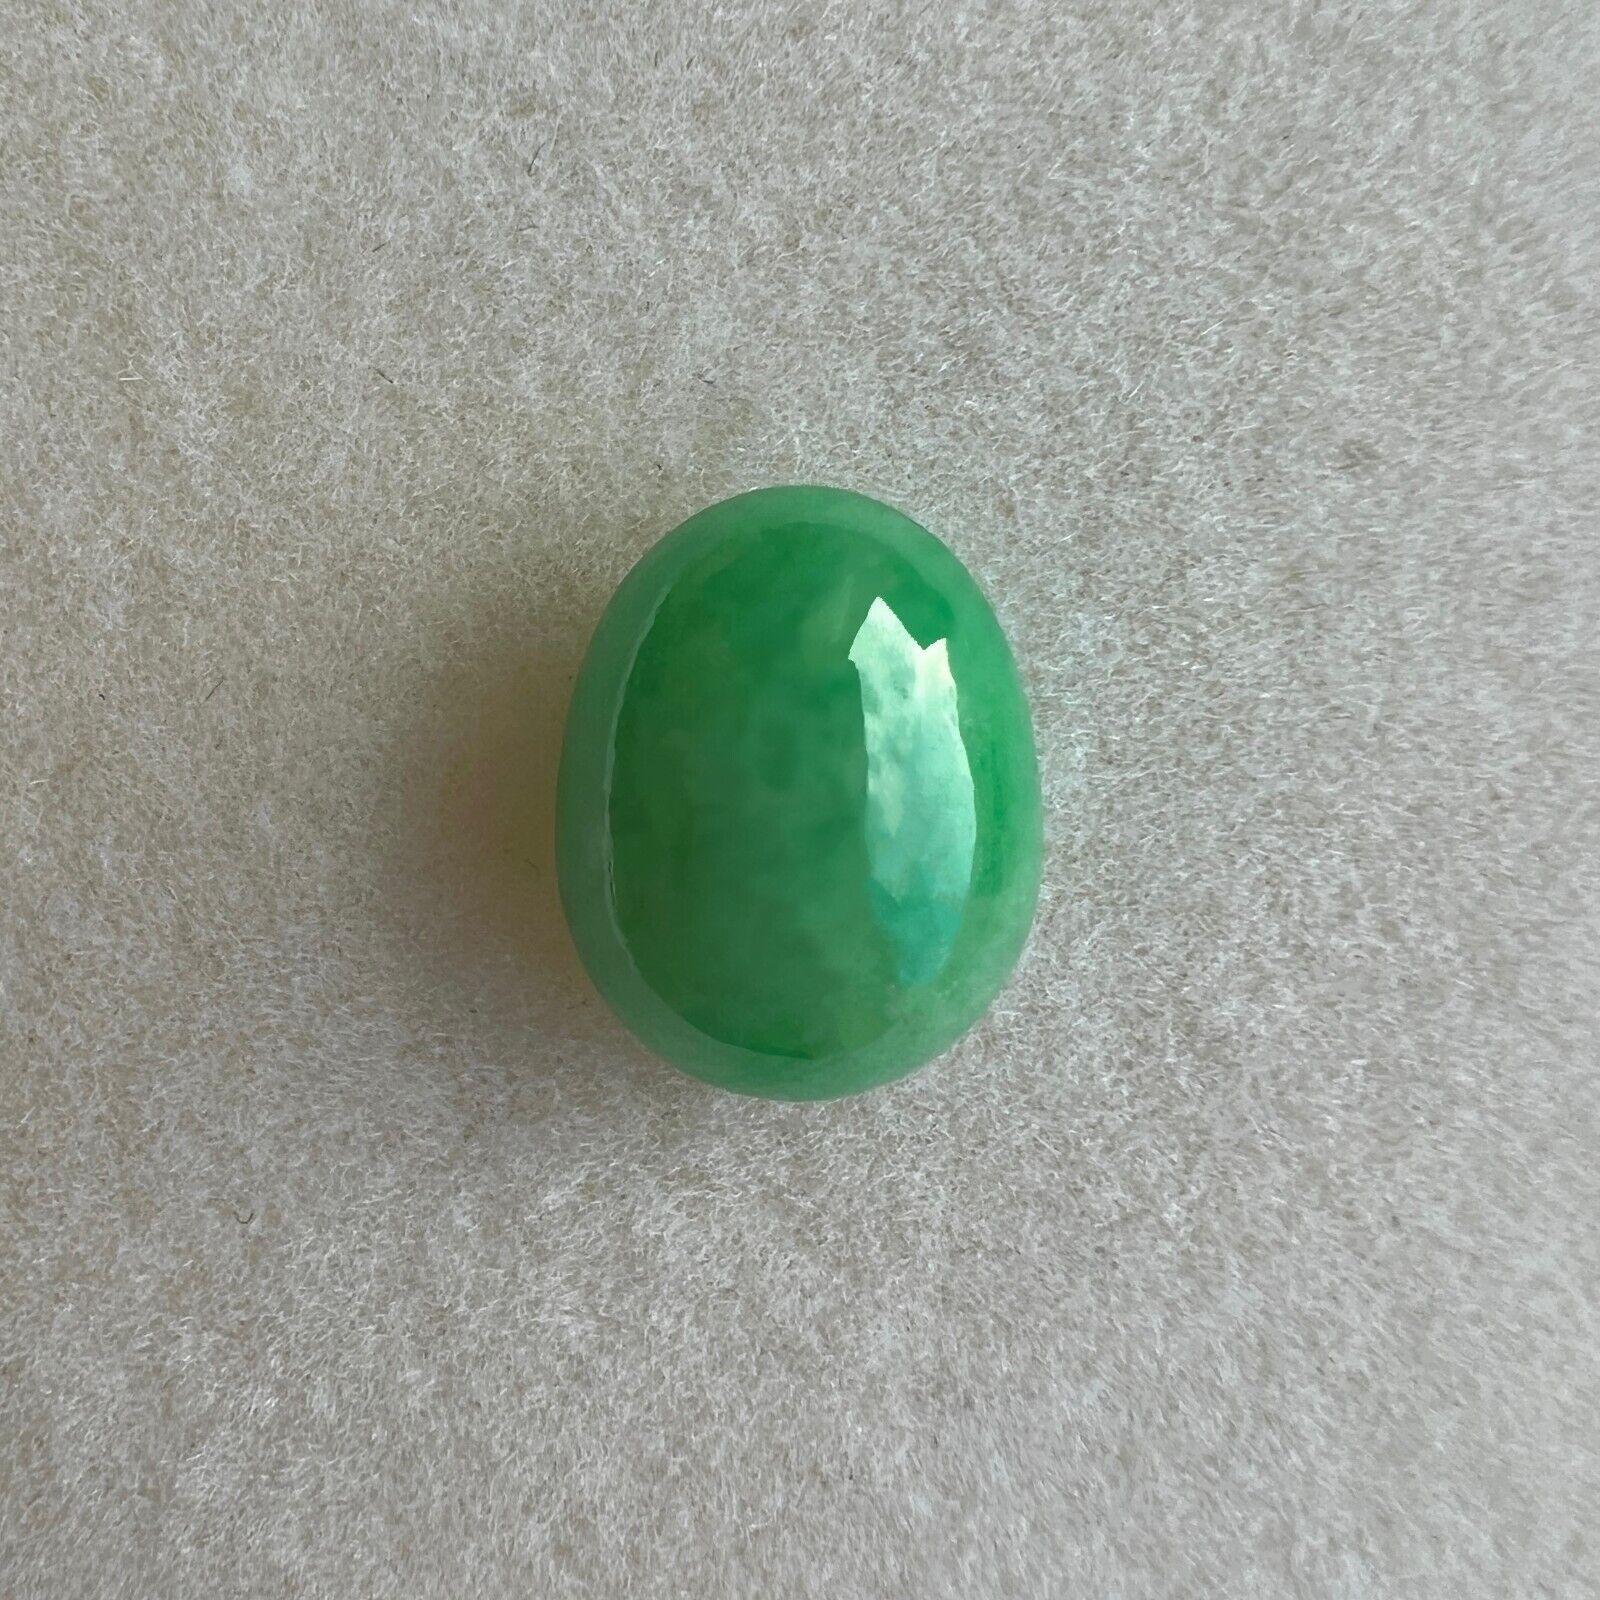 Rare 4.03ct IGI Certified Green Jadeite Jade ‘A’ Grade Oval Cabochon Loose Gem

Natural IGI Certified Untreated A Grade Green Jadeite Gemstone.
4.03 Carat with an excellent oval cabochon cut and bright green colour. Fully certified by IGI in